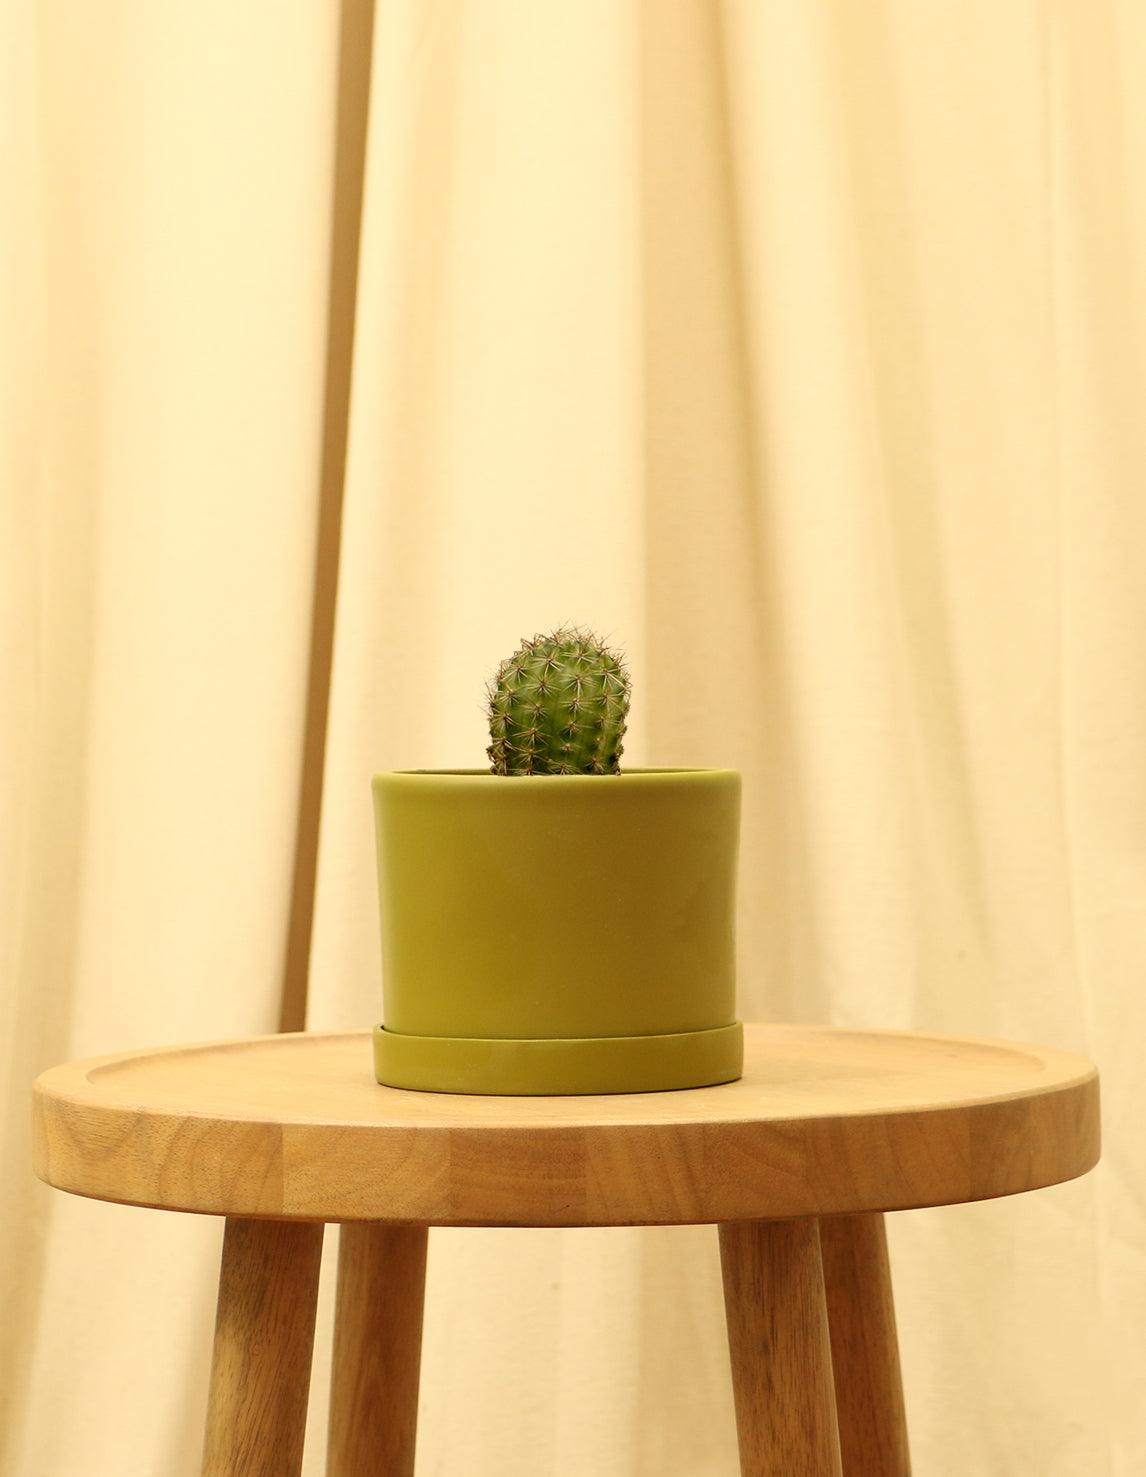 Small Torch Cactus in green pot.